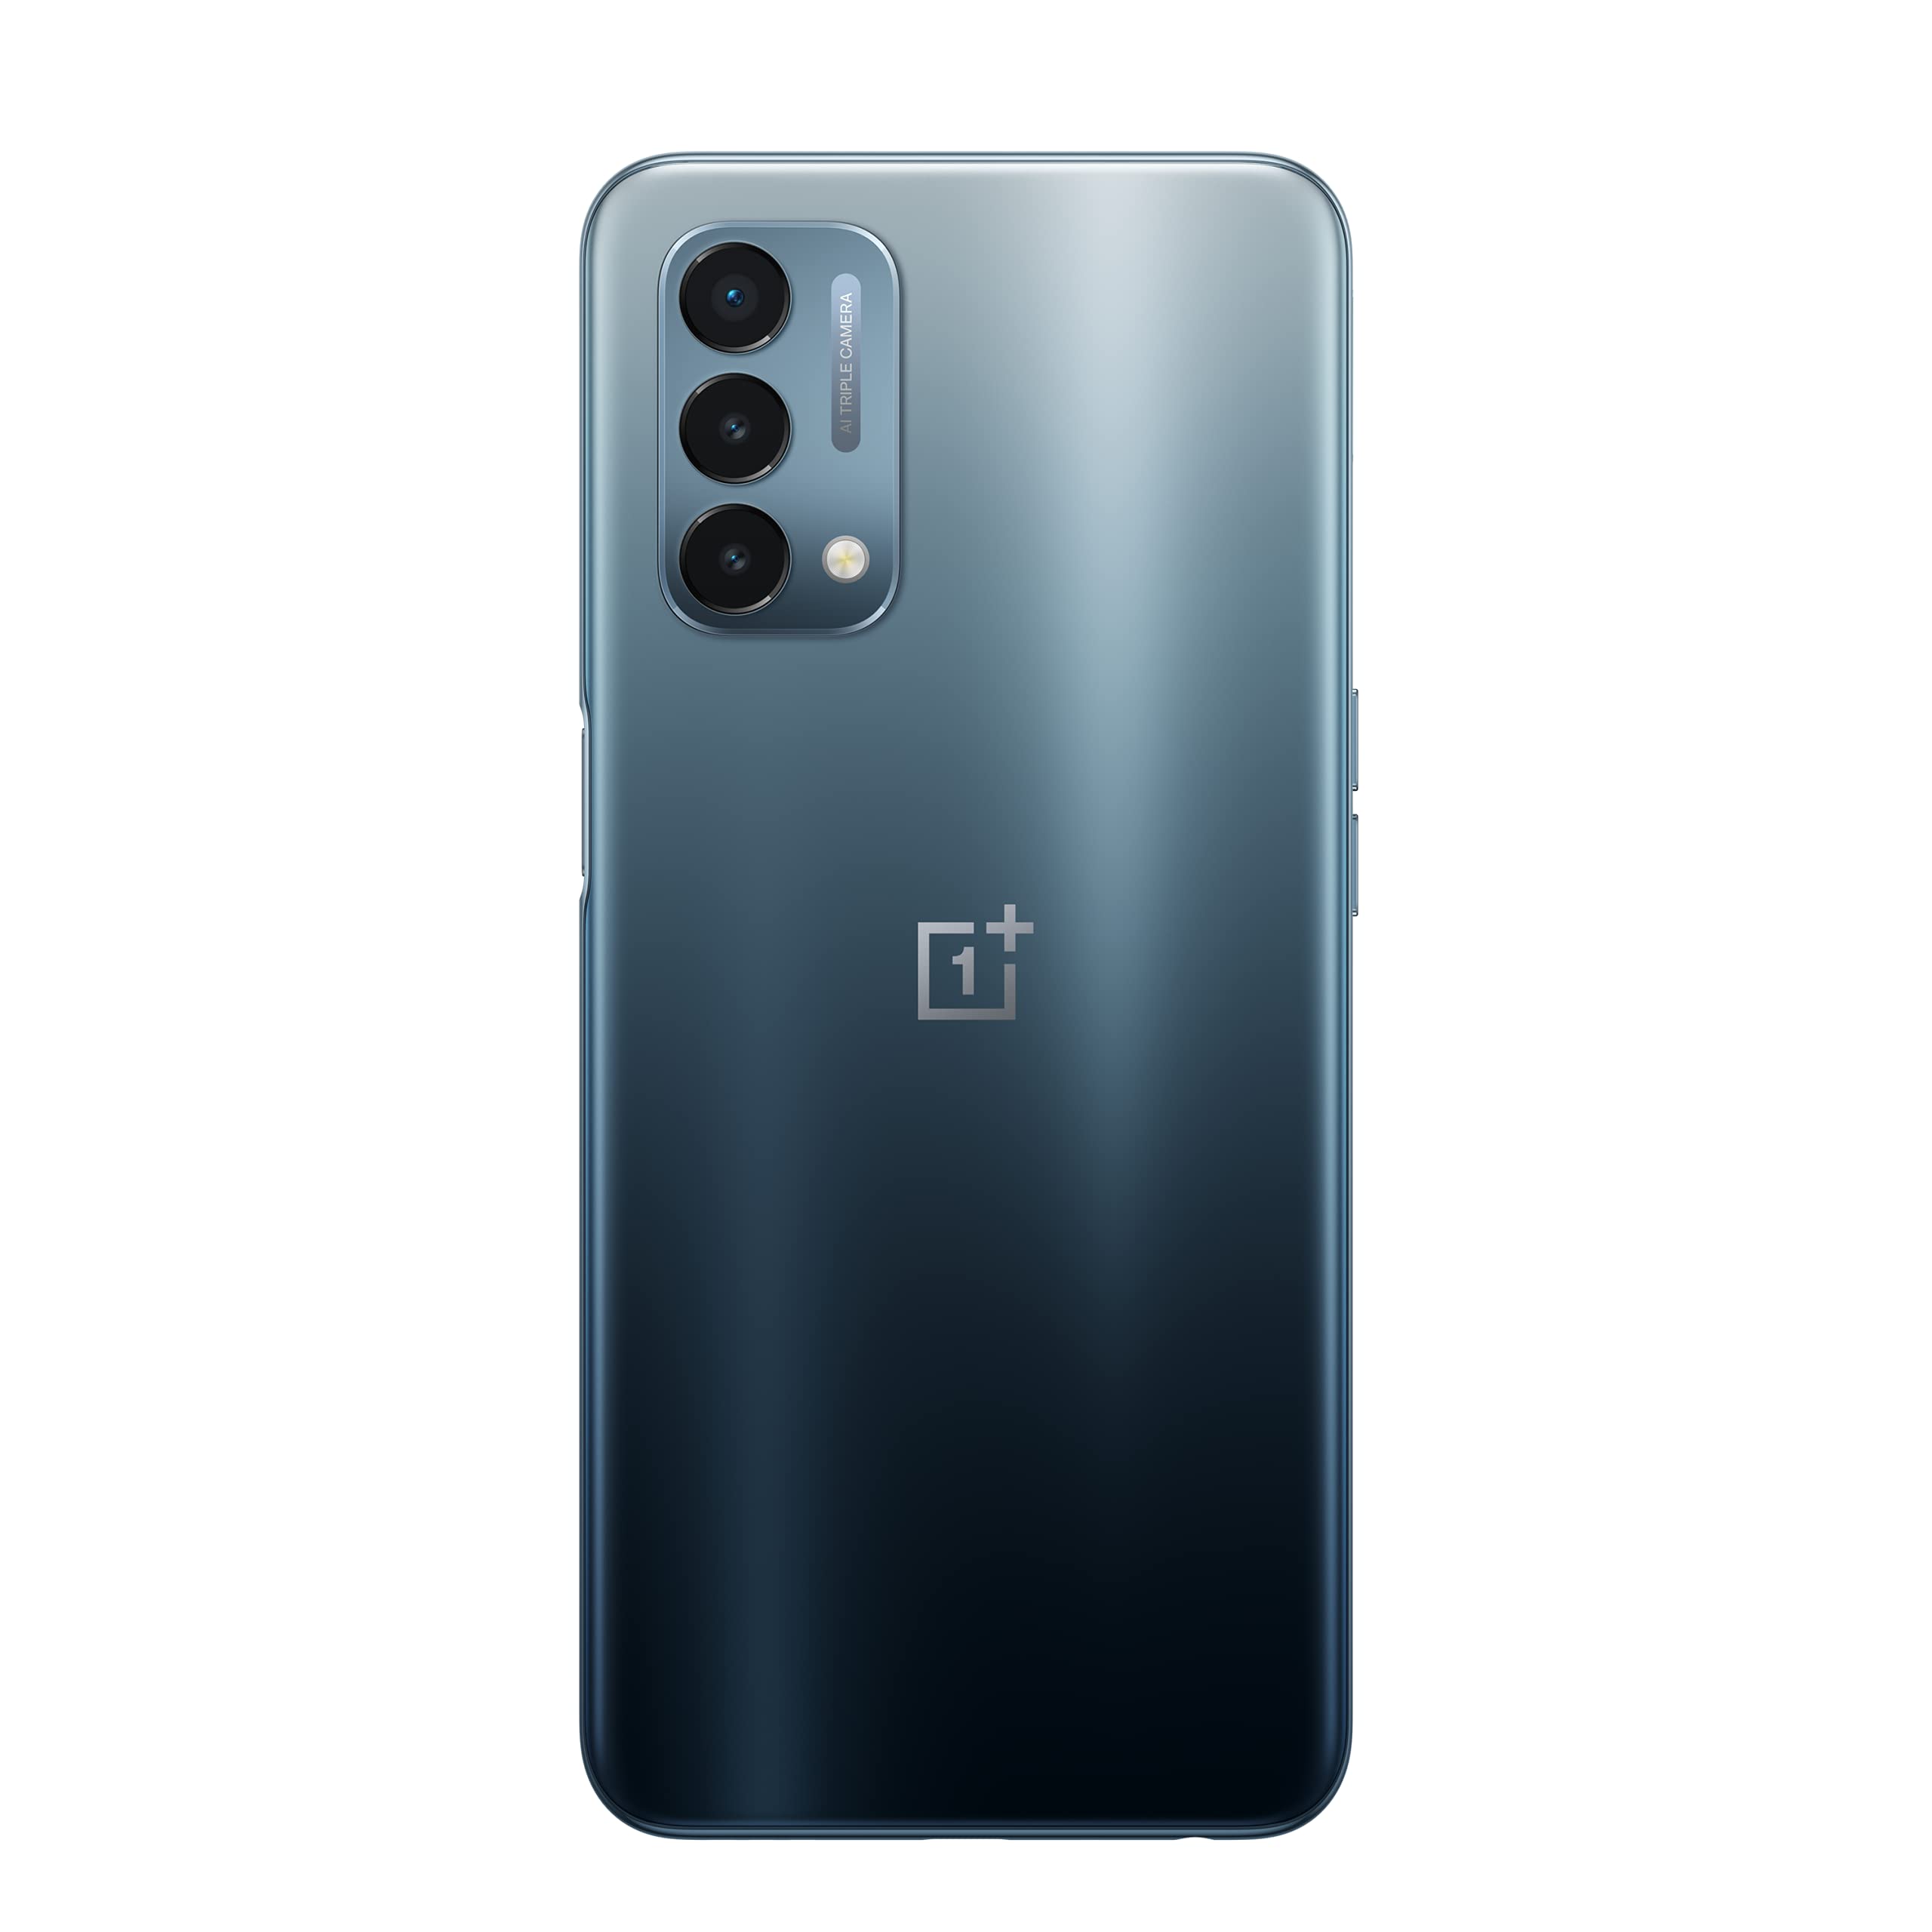 OnePlus Nord N200 | Large 5000mAh Battery | 5G Unlocked Android Smartphone U.S Version | 64GB Storage | 6.49